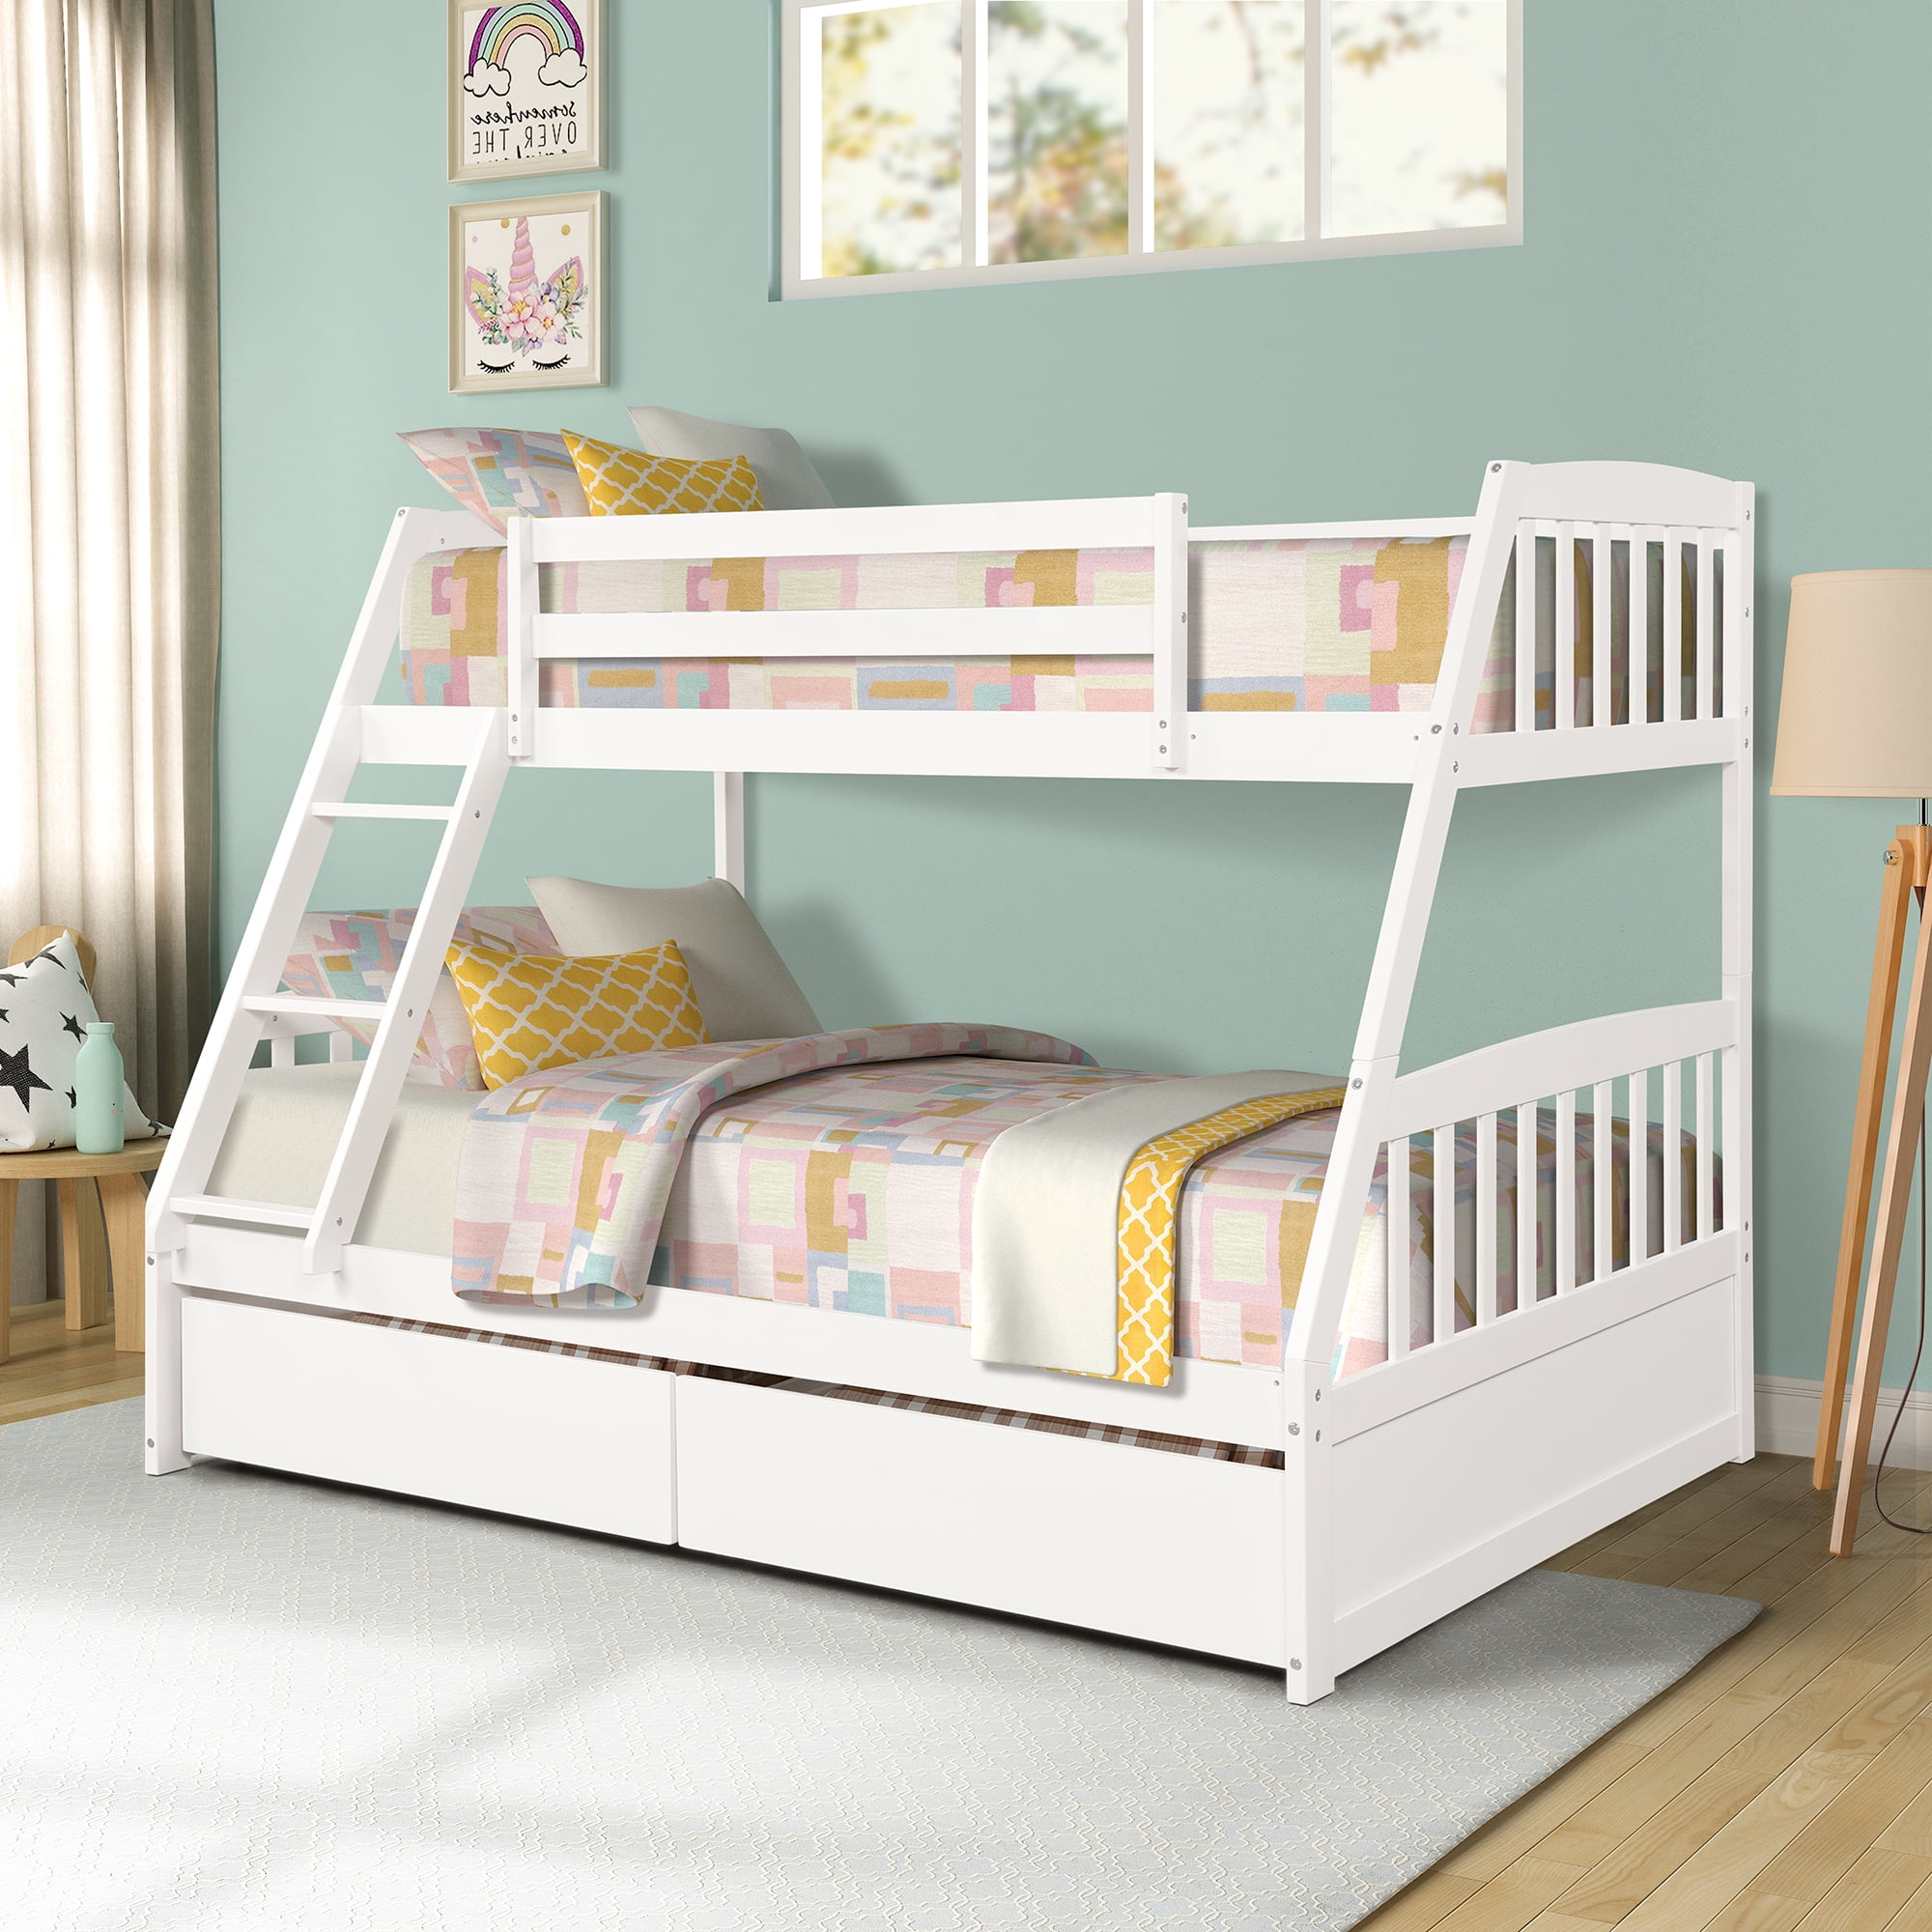 Wooden Bunk Bed Frame, Modern Sturdy Bunk Bed, Twin over Full Bunk Beds with Removable Ladder, 2